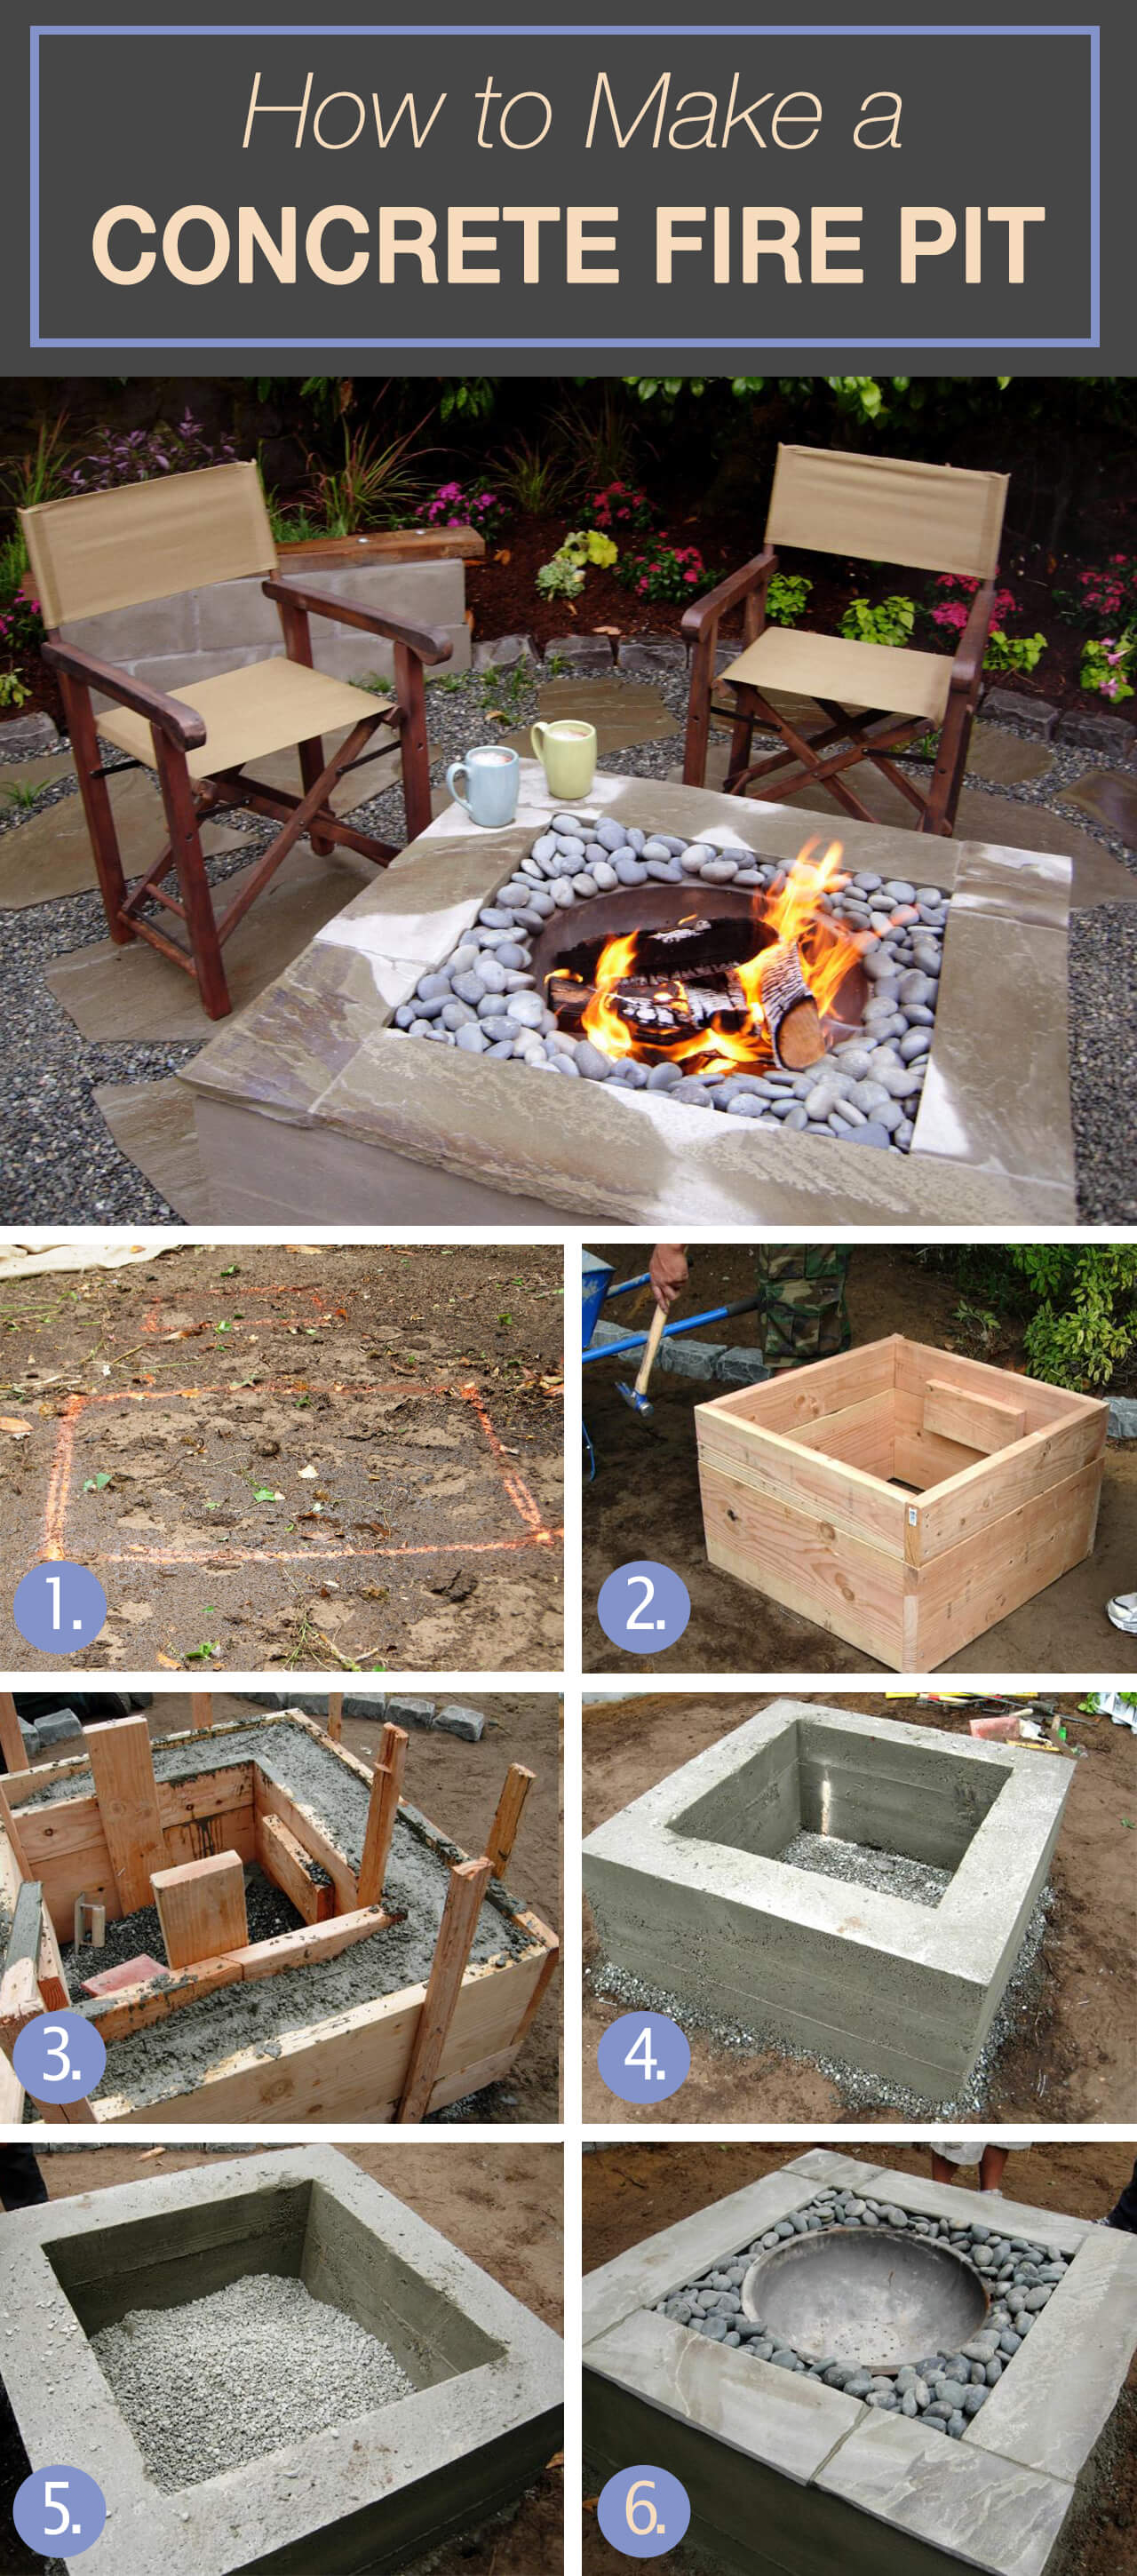 27 Best Diy Firepit Ideas And Designs, Build Your Own Fire Pit Table